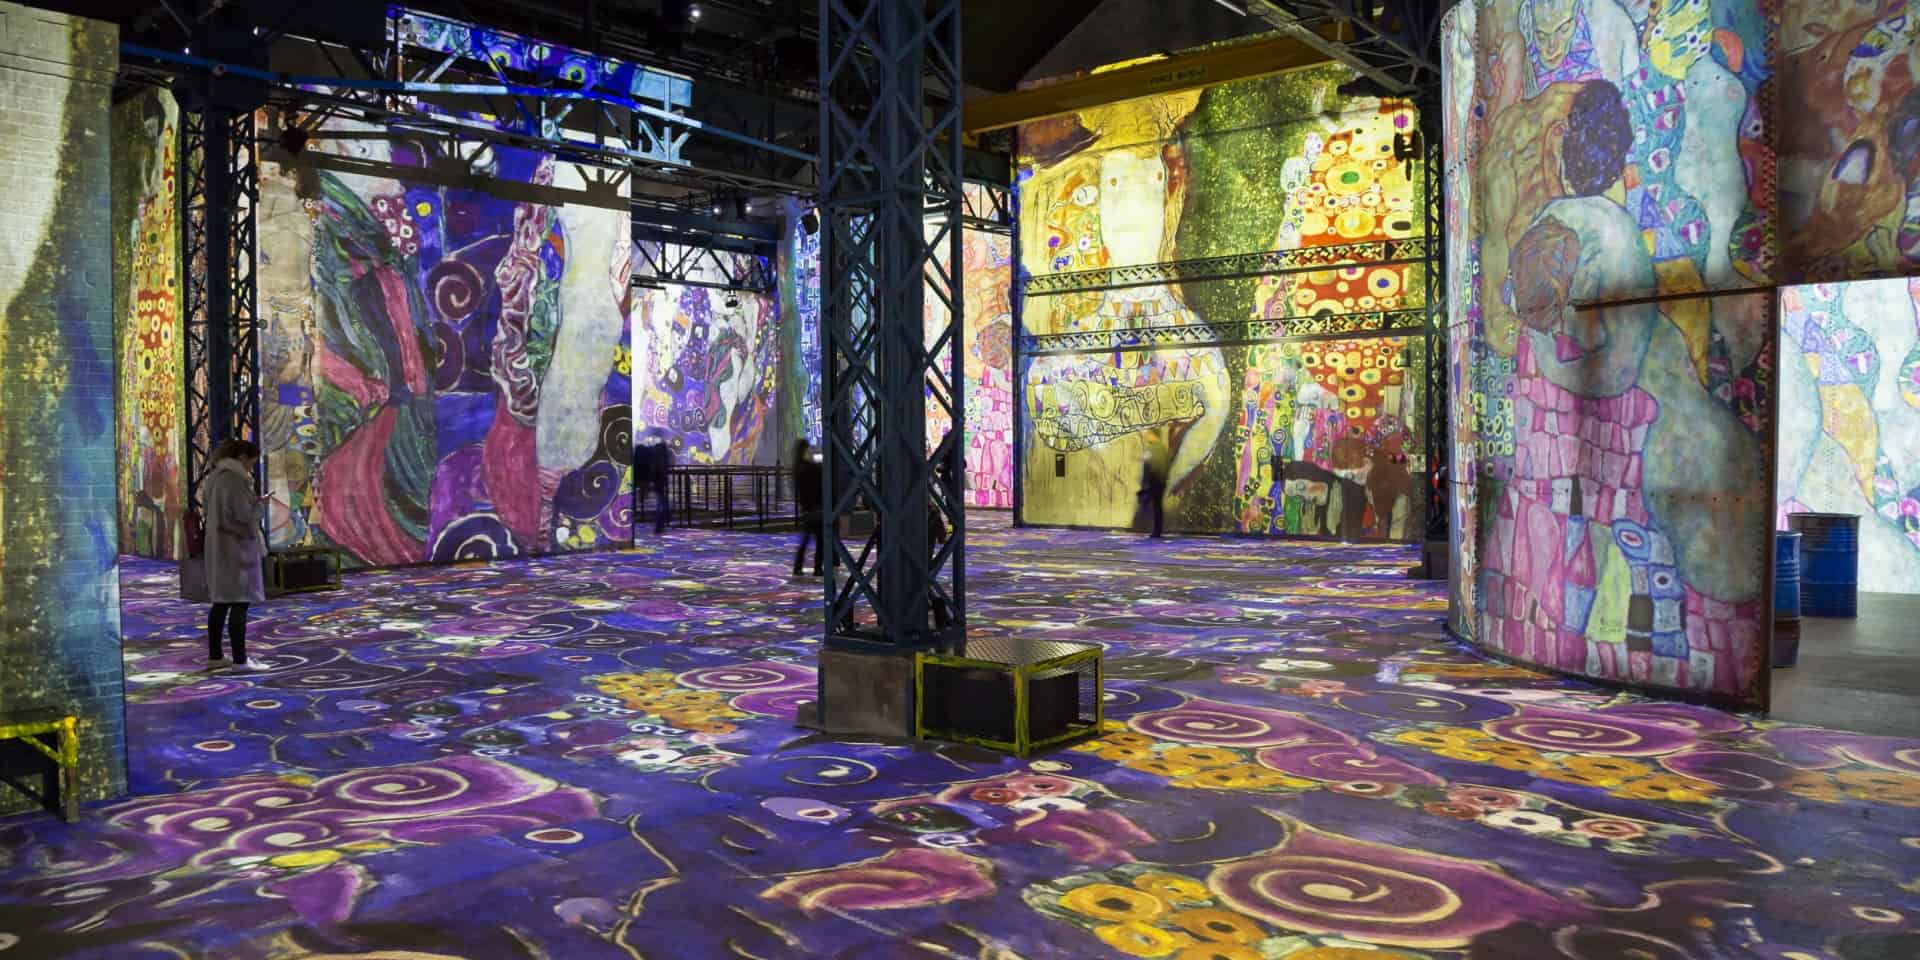 Digital Paris museum the Ateliers des Lumieres opened with a light and sound show of Gustav Klimt's work and this year, it welcomes the works of Van Gogh.